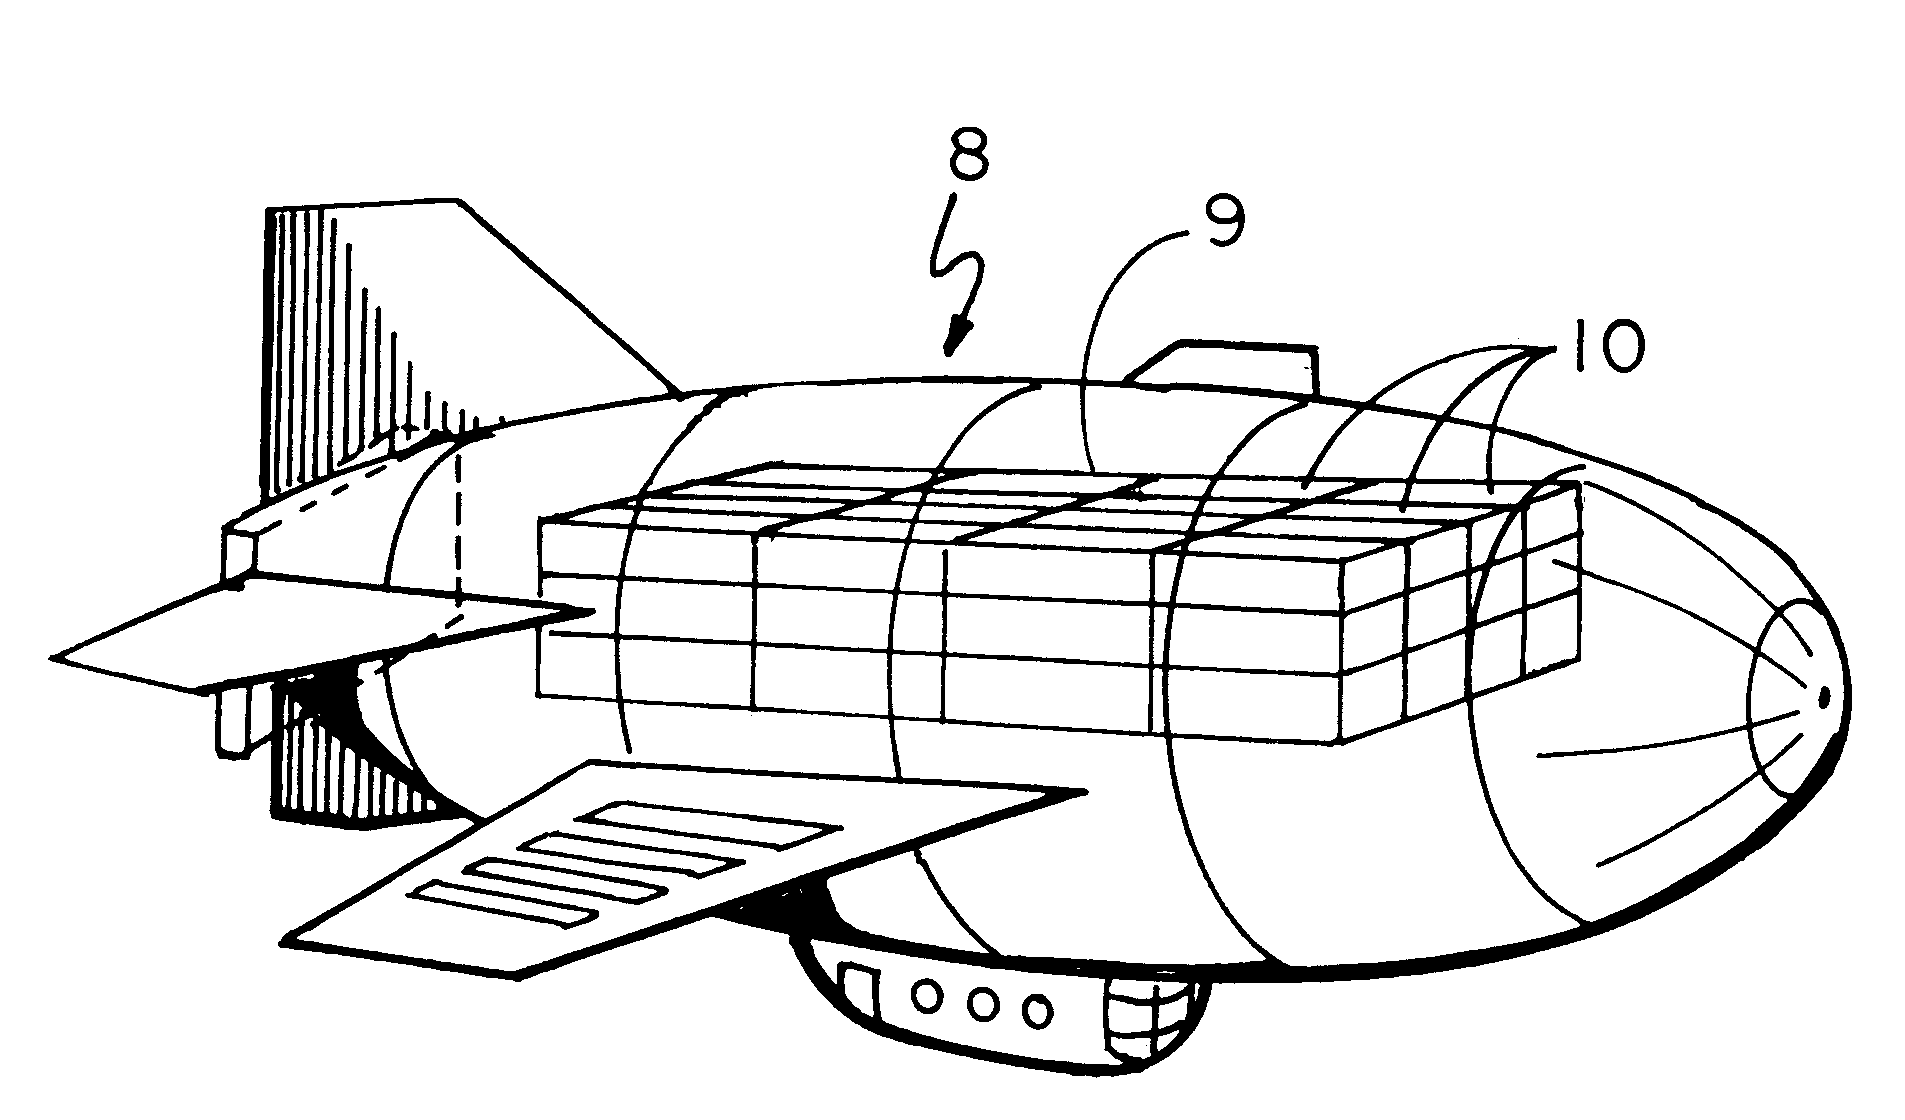 Apparatus and method utilizing cells to provide lift in lighter-than-air airships